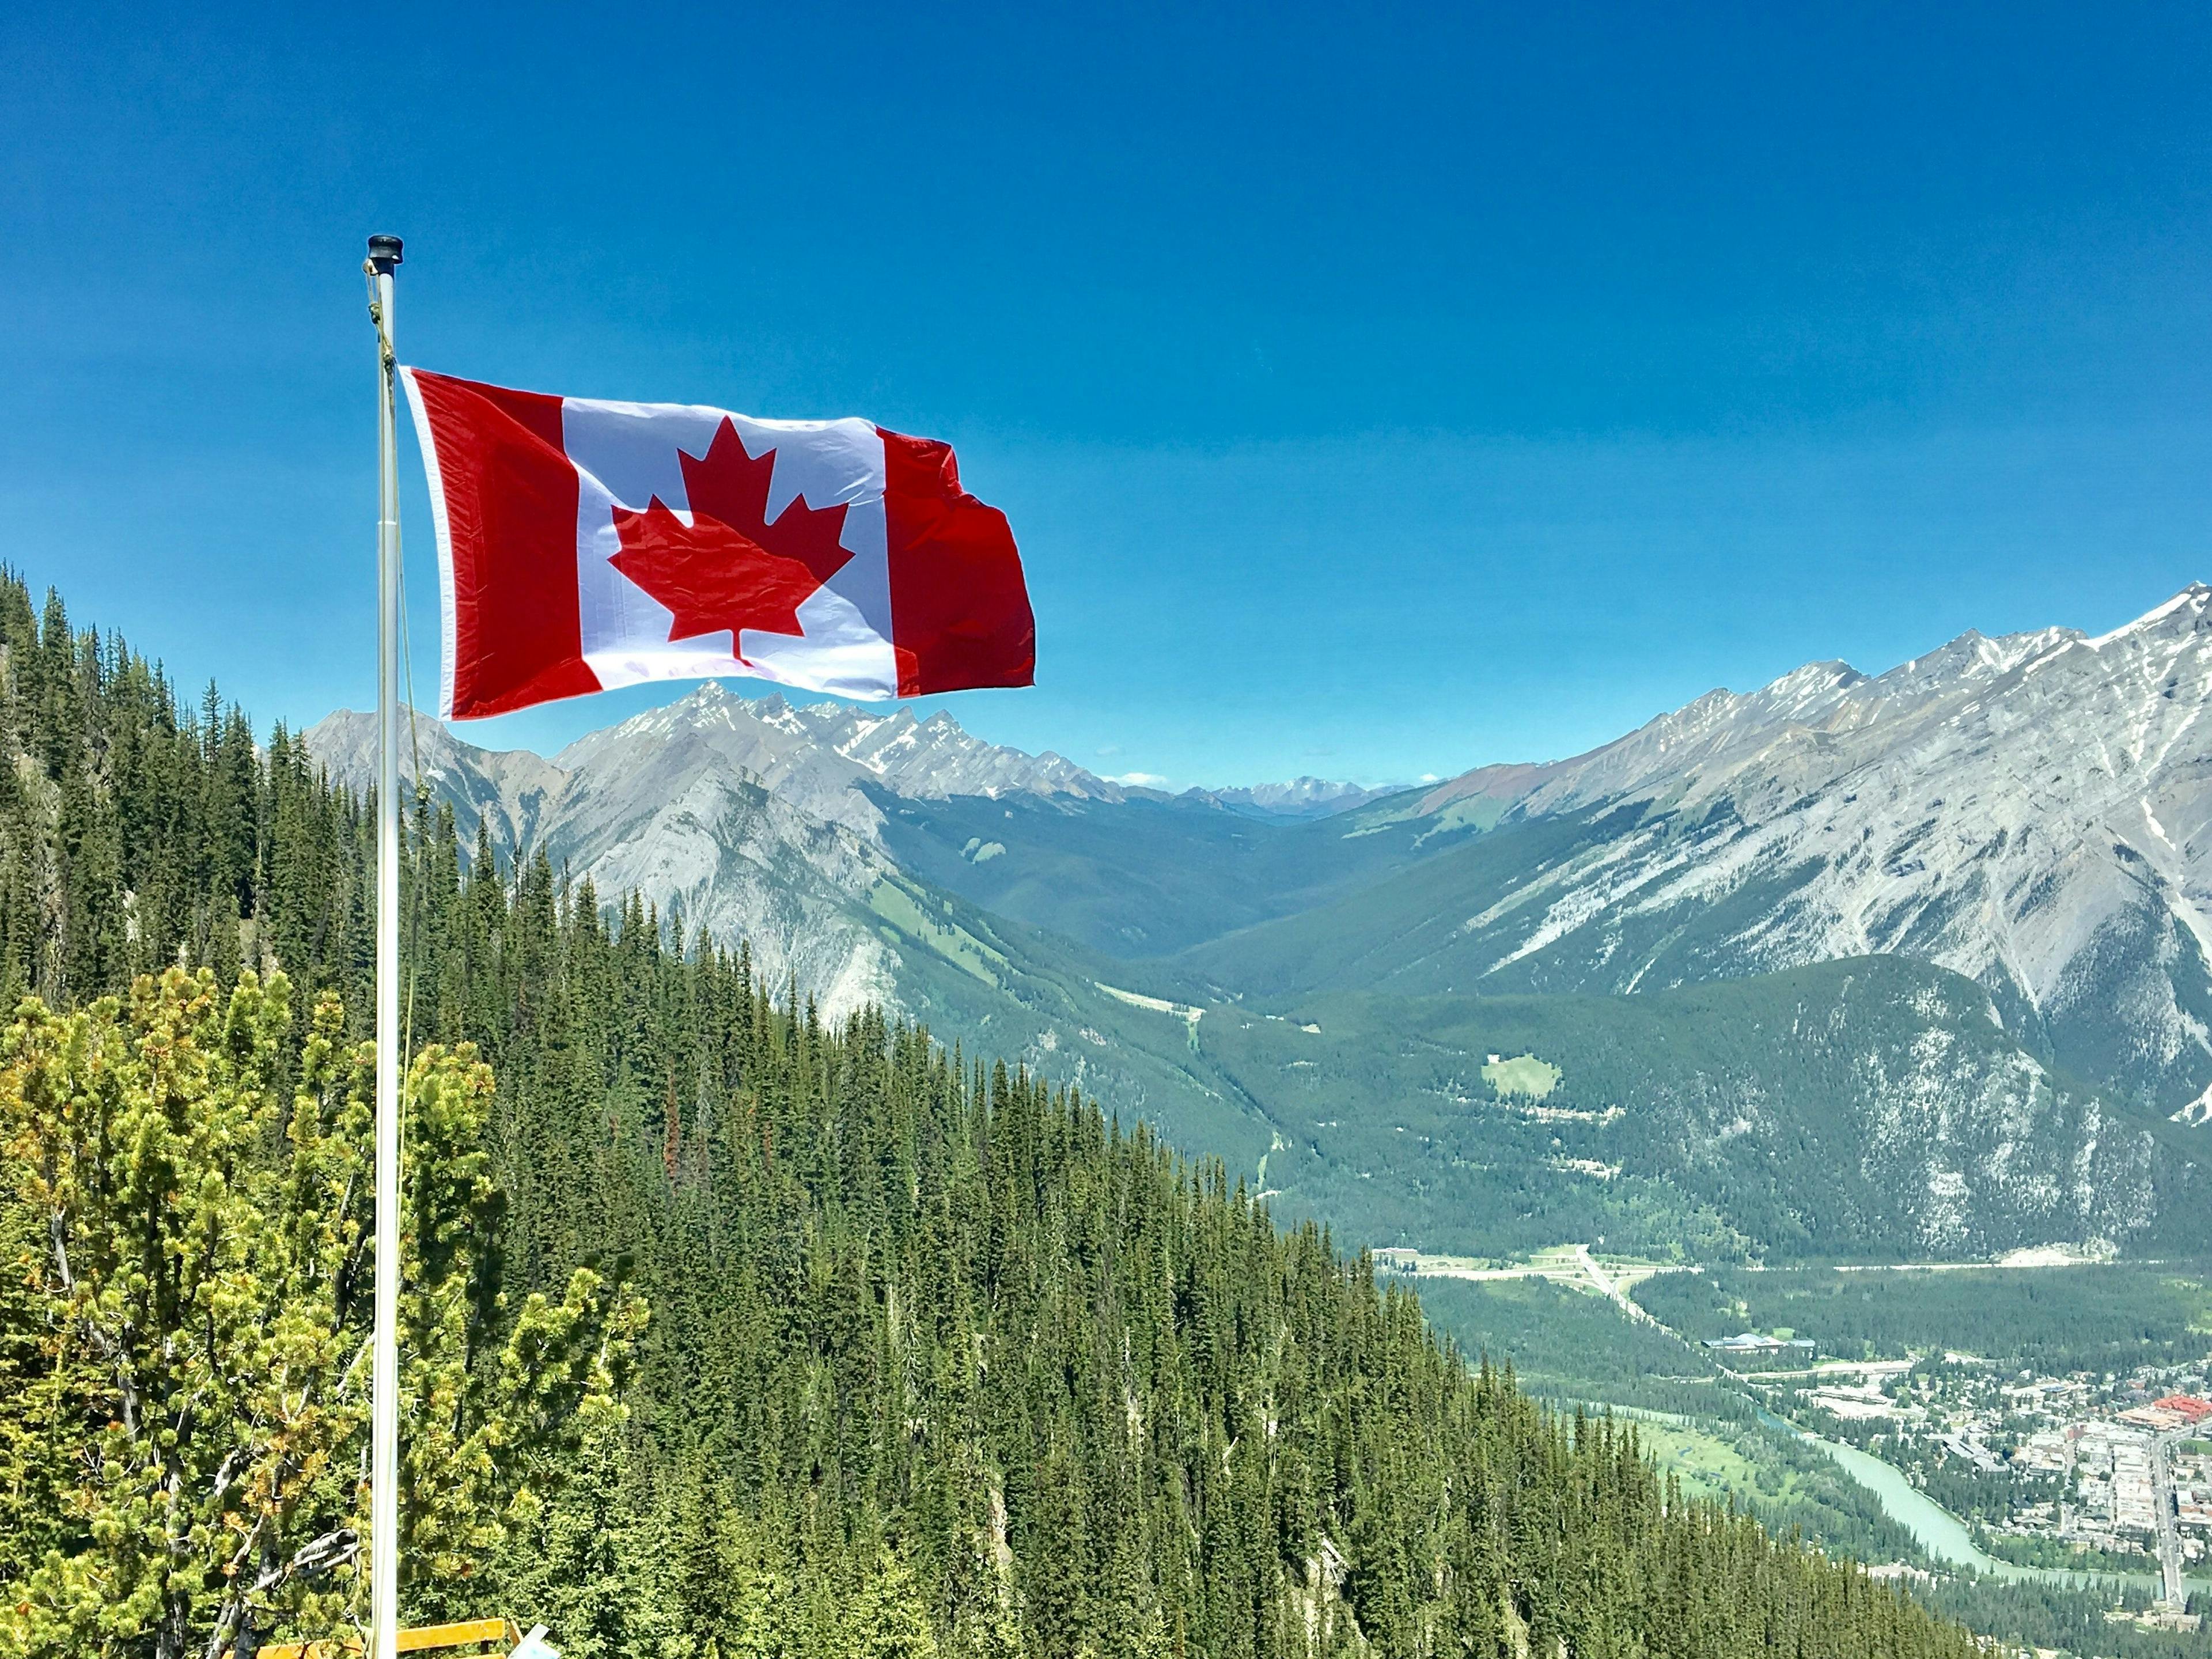 Canadian flag on a flag pole with mountain landscape in the background